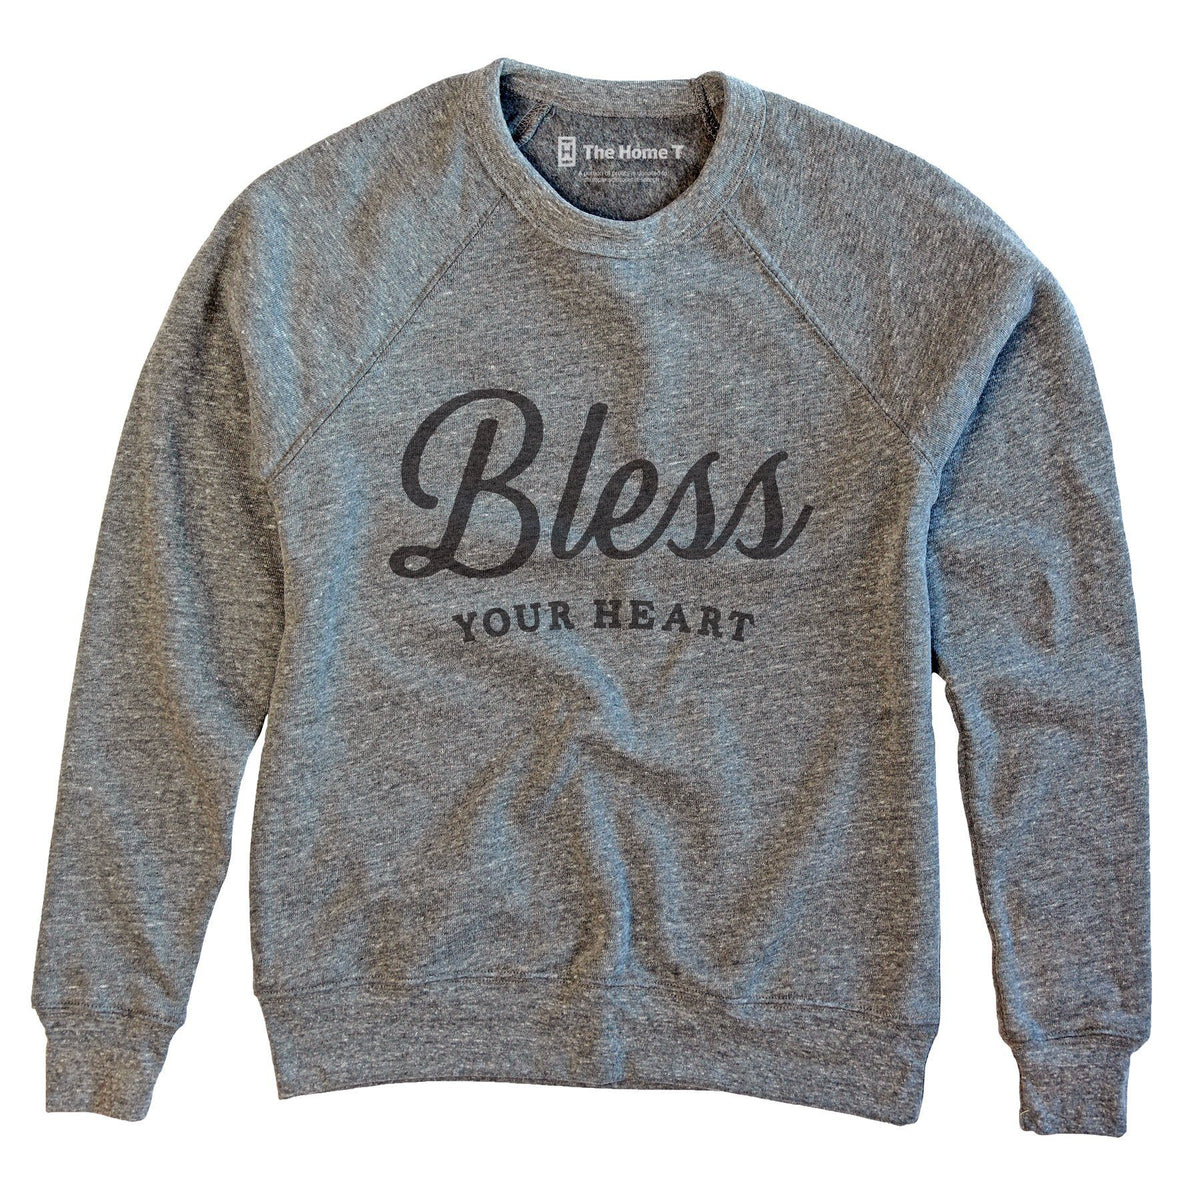 Bless Your Heart Shirts The Home T XS Sweatshirt